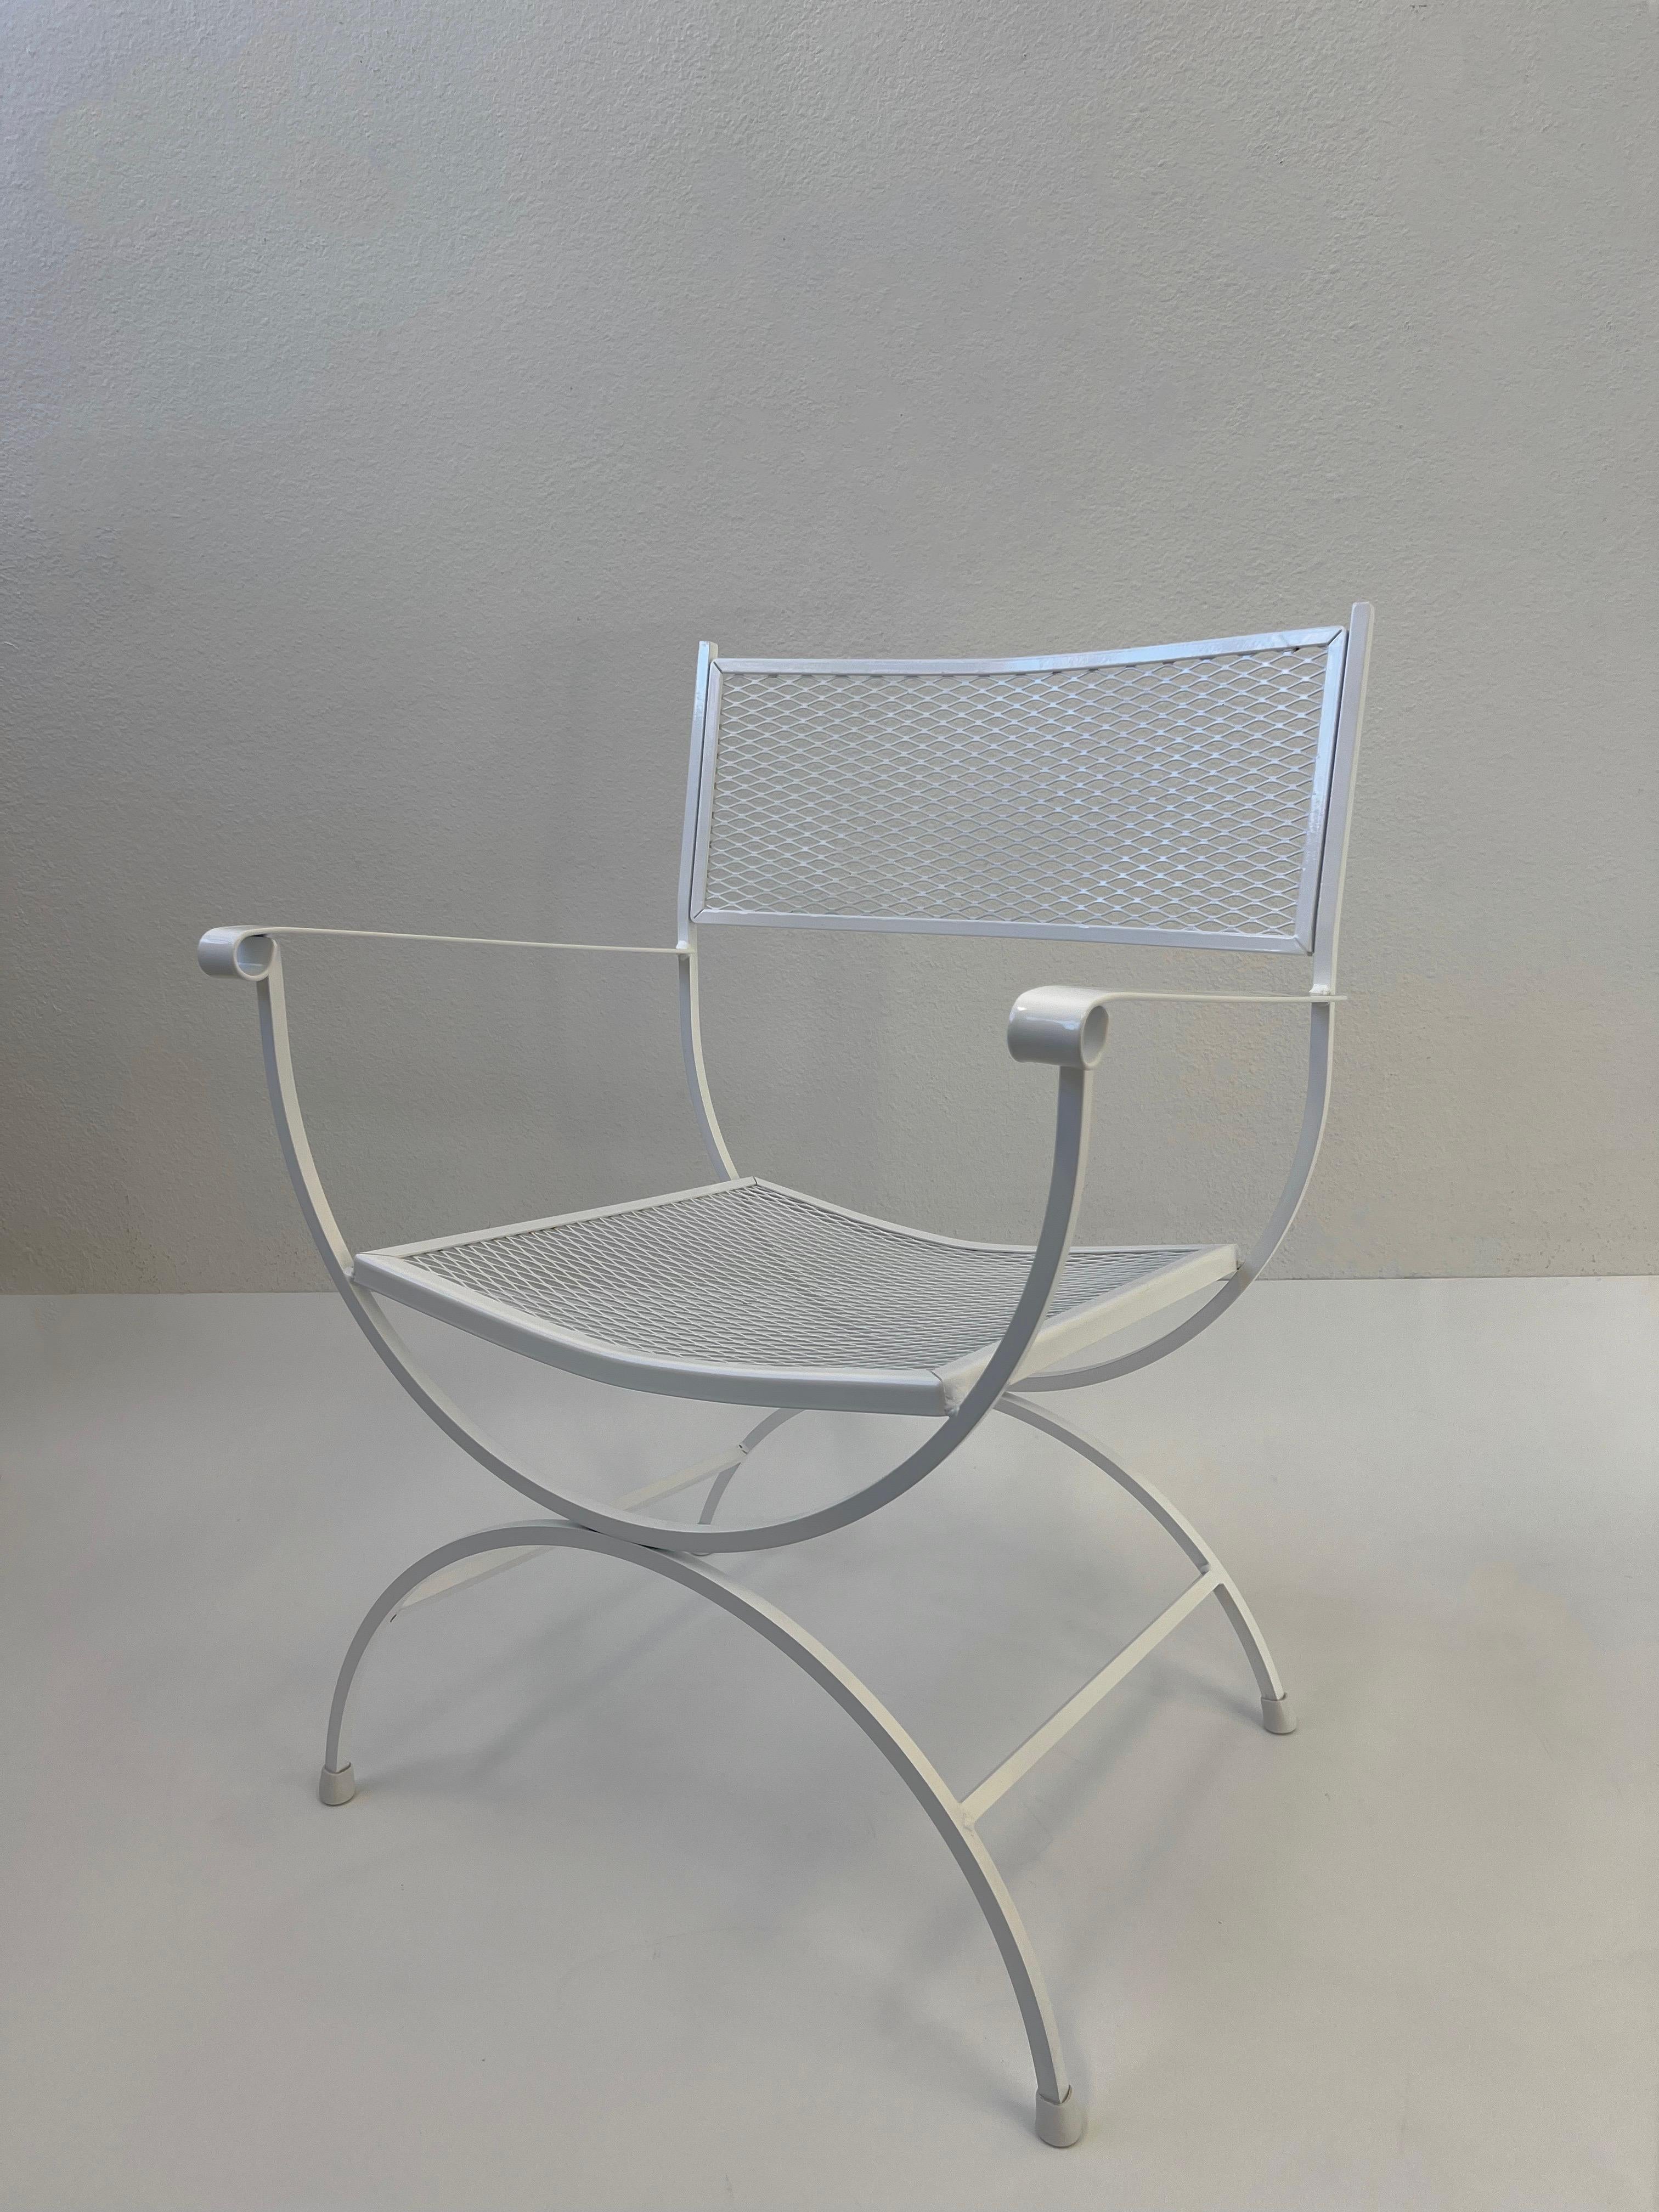 1960’s Patio set by Bob Anderson. 
Set consists of four chairs and table. 
Newly powder coated white. 

Measurements: 
Table- 48” Diameter, 27.75” High.
Chair- 24.25” Wide, 21” Deep, 33.25” High, 17” Seat, 25.25” Arm. 